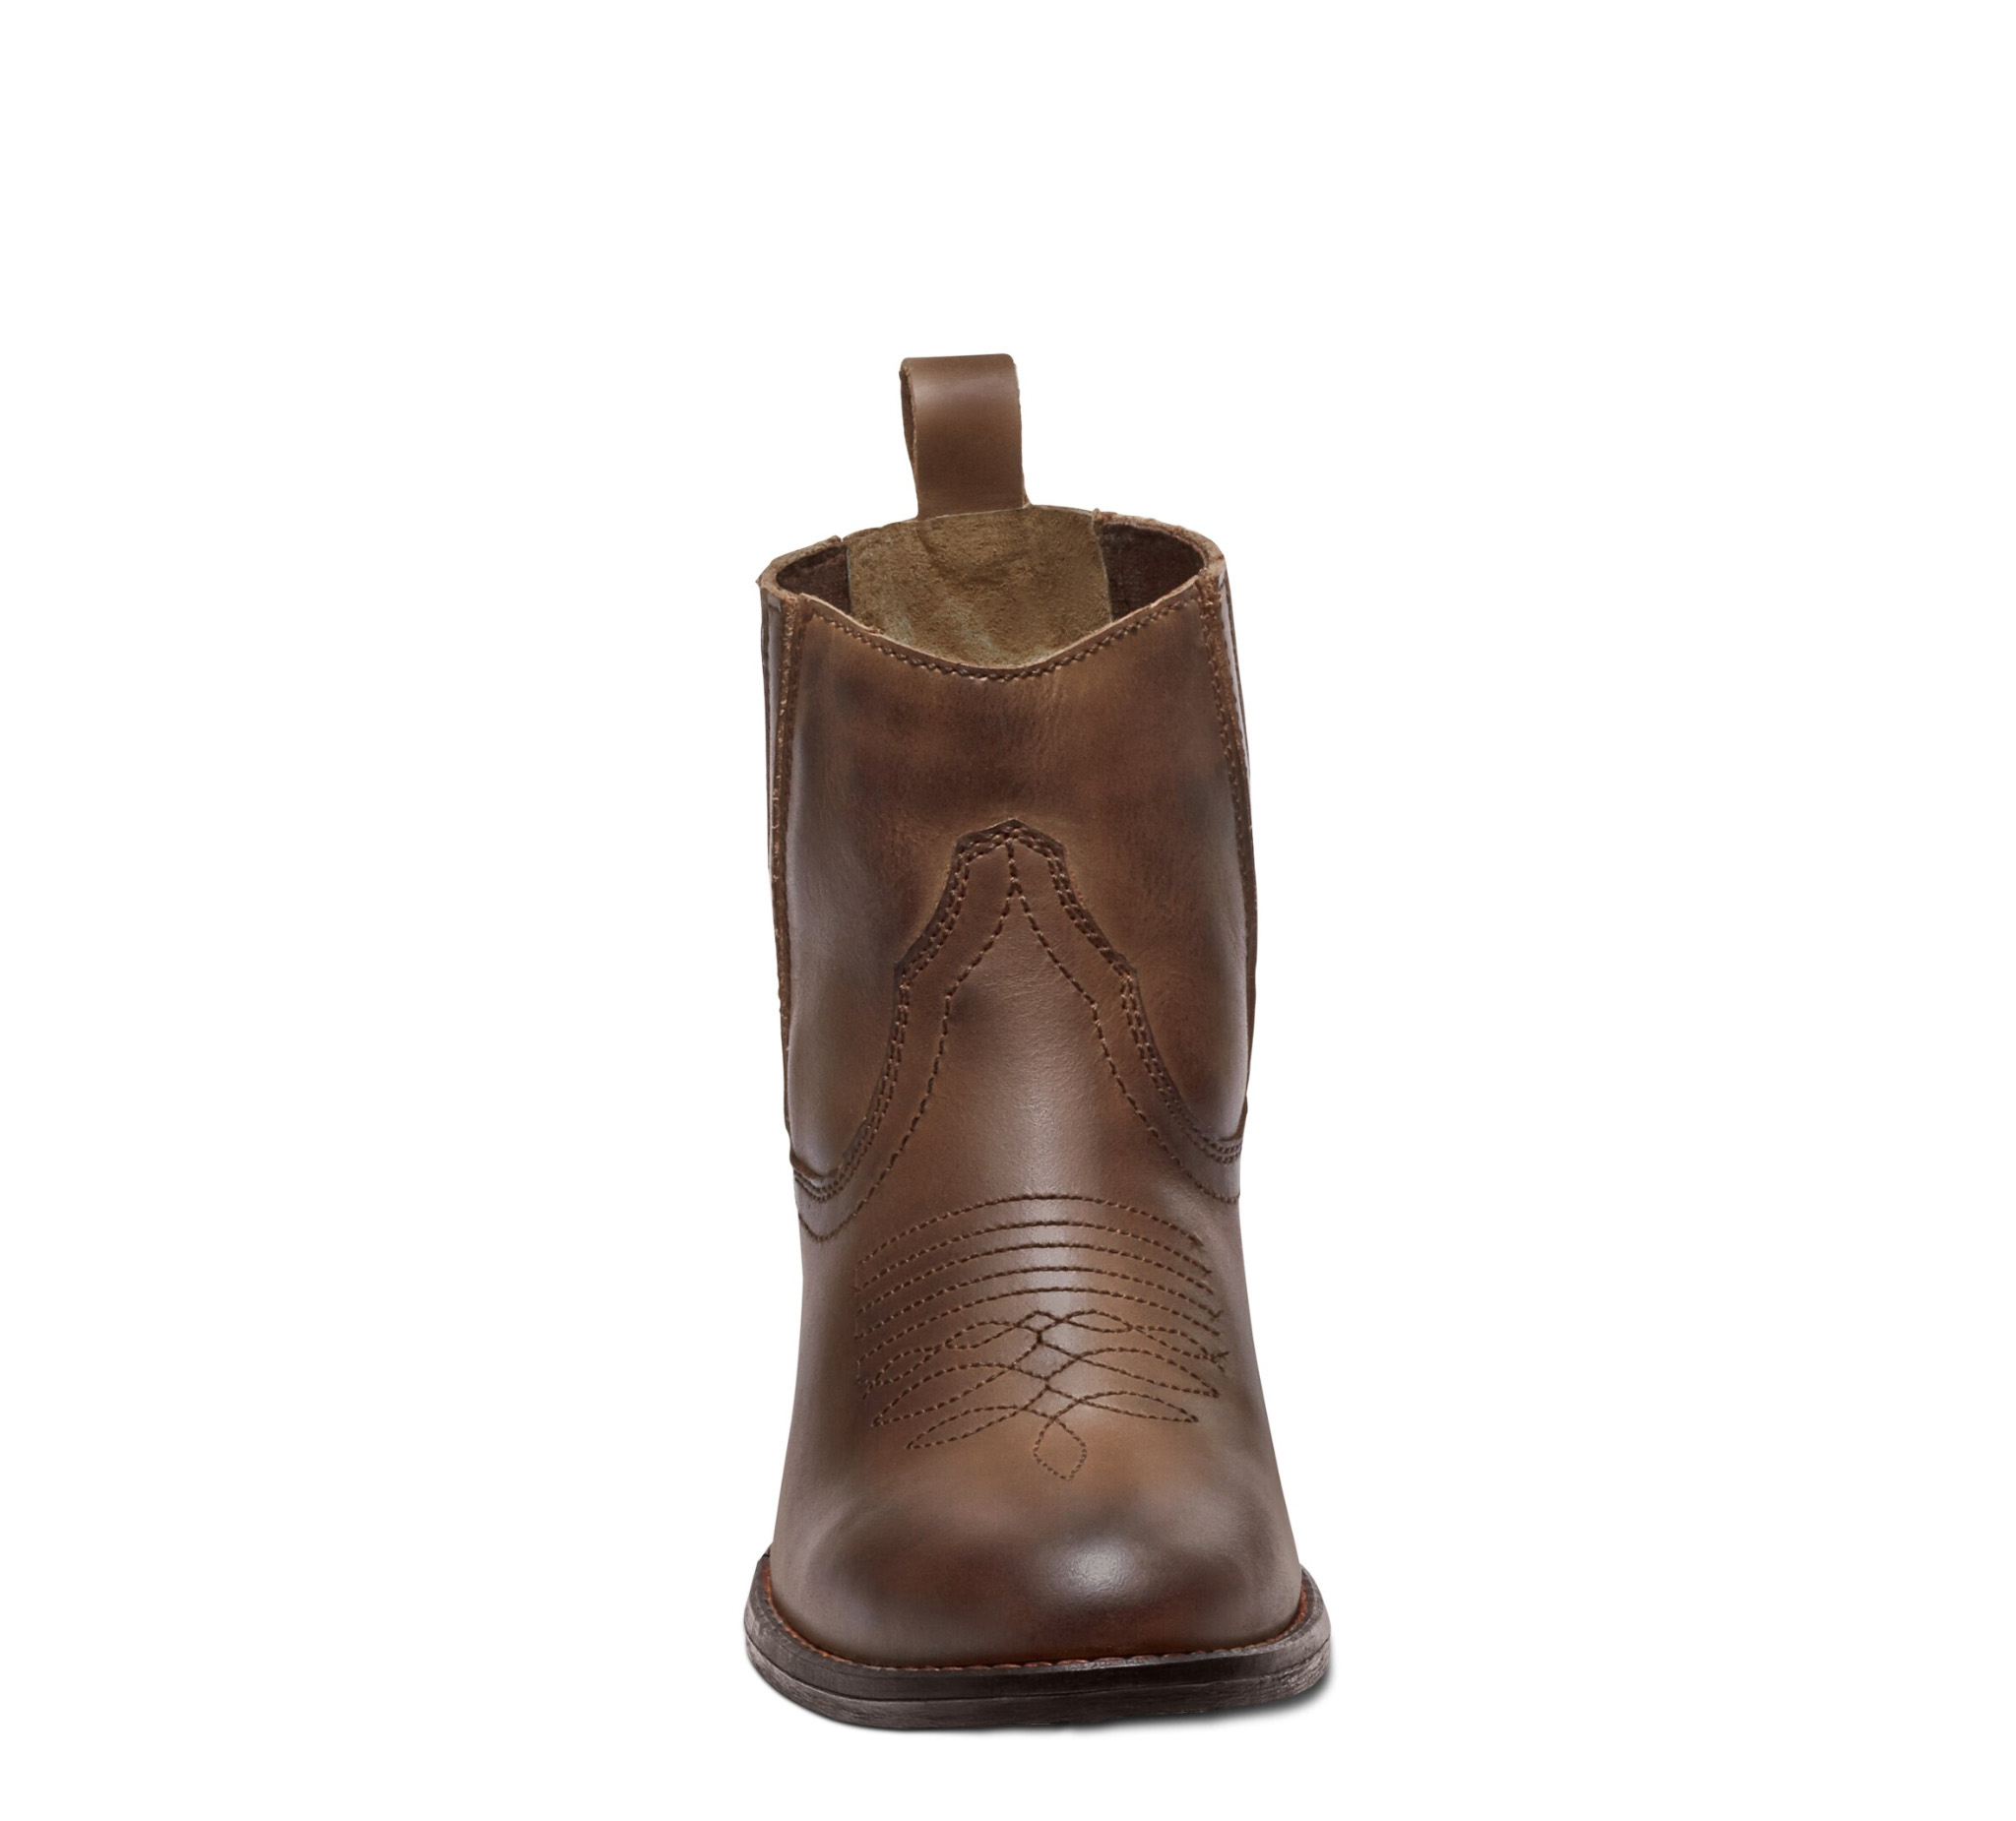 Curwood Boots - Brown - 98628-19VW 